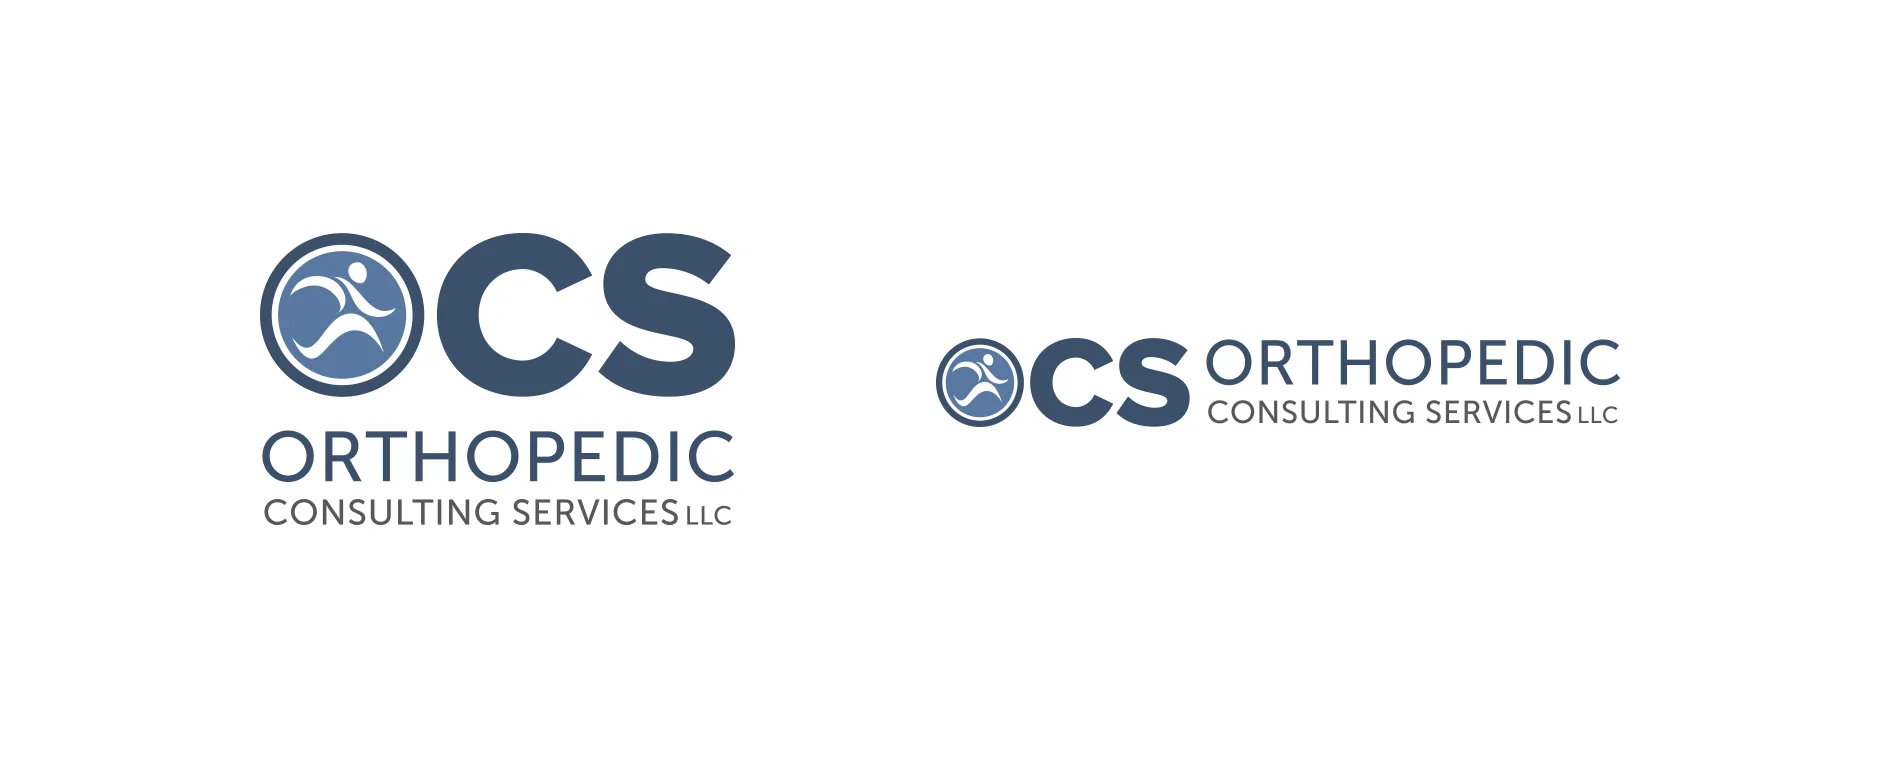 Orthopedic Consulting Services logo